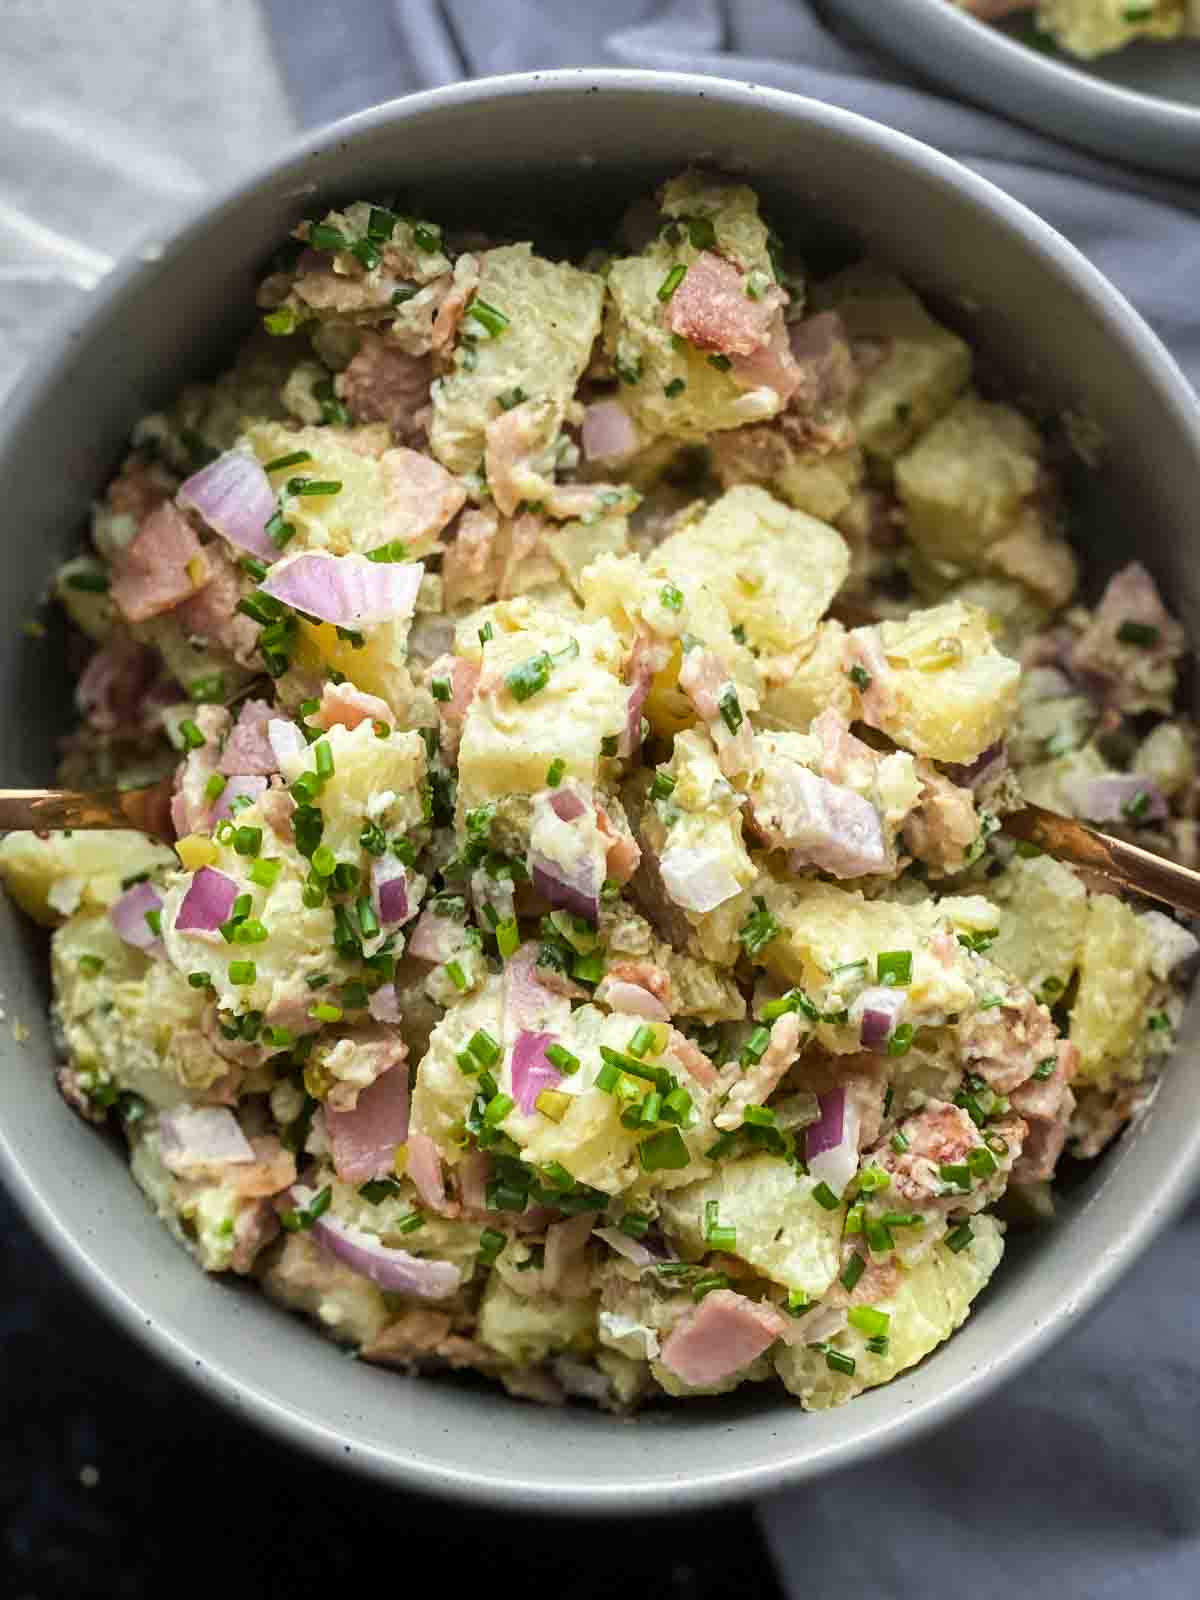 Potato salad in a large grey bowl with 2 spoons inside